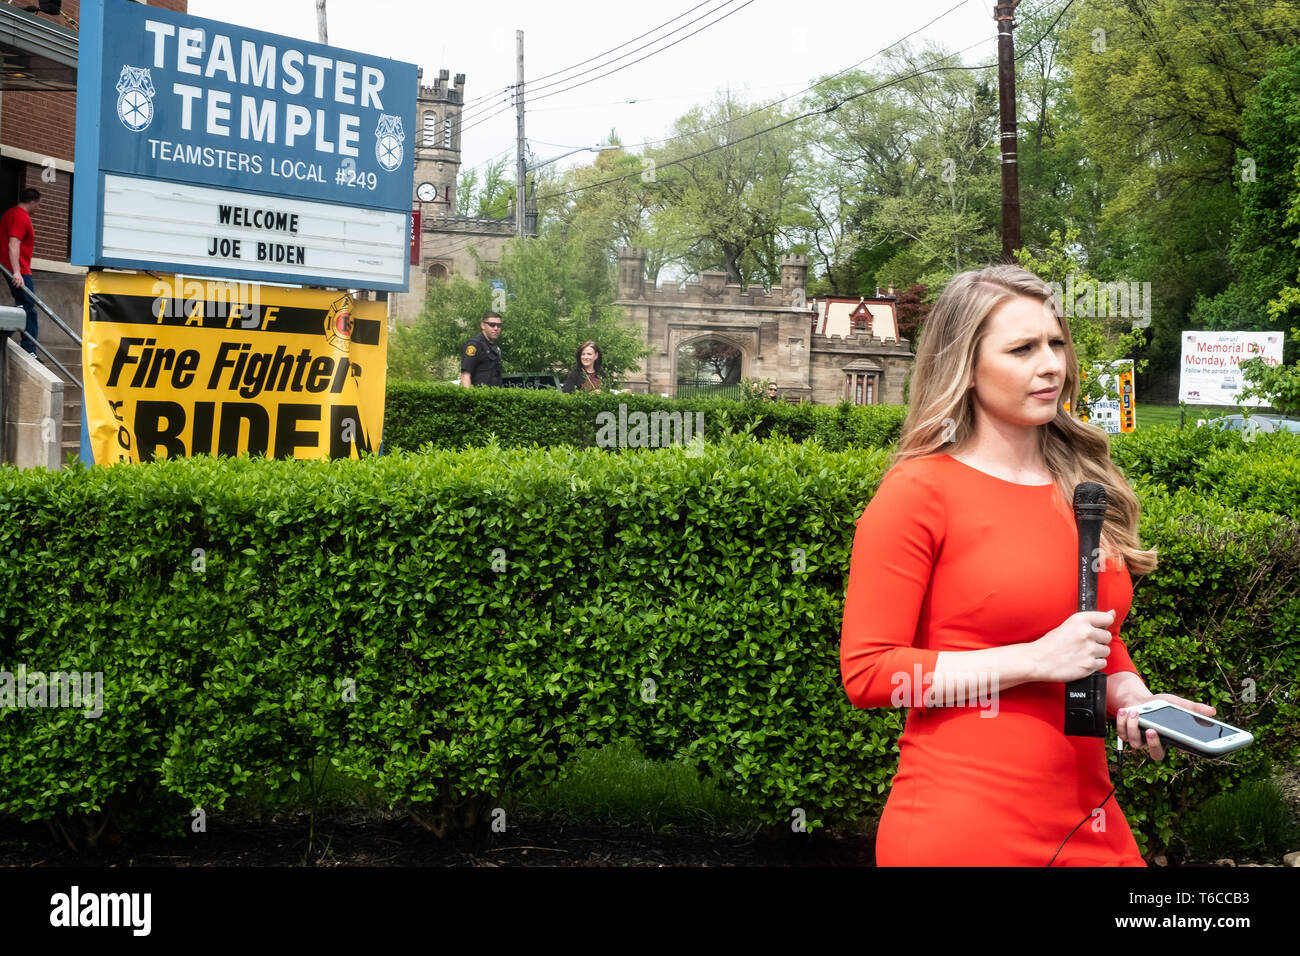 A news reporter seen during the rally. Joe Biden comes to Pittsburgh to start off his 2020 bid for the president of the United States.  Rally is held at Teamsters in the Lawreceville neighborhood of Pittsburgh, PA. Stock Photo